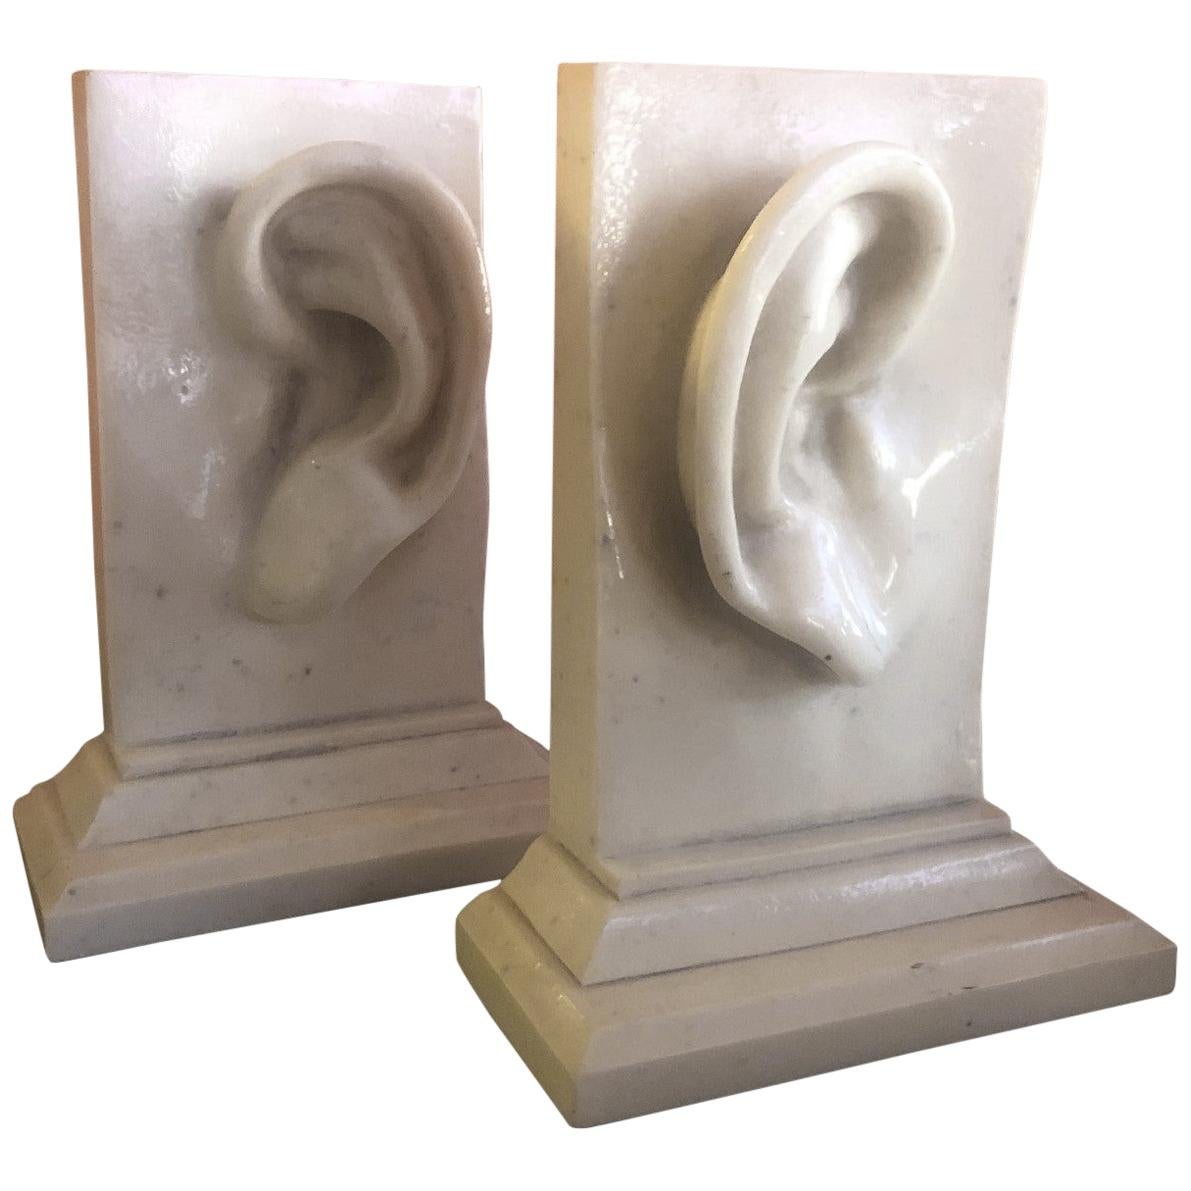 Pair of Faux Marble Pop Art "Ear" Bookends